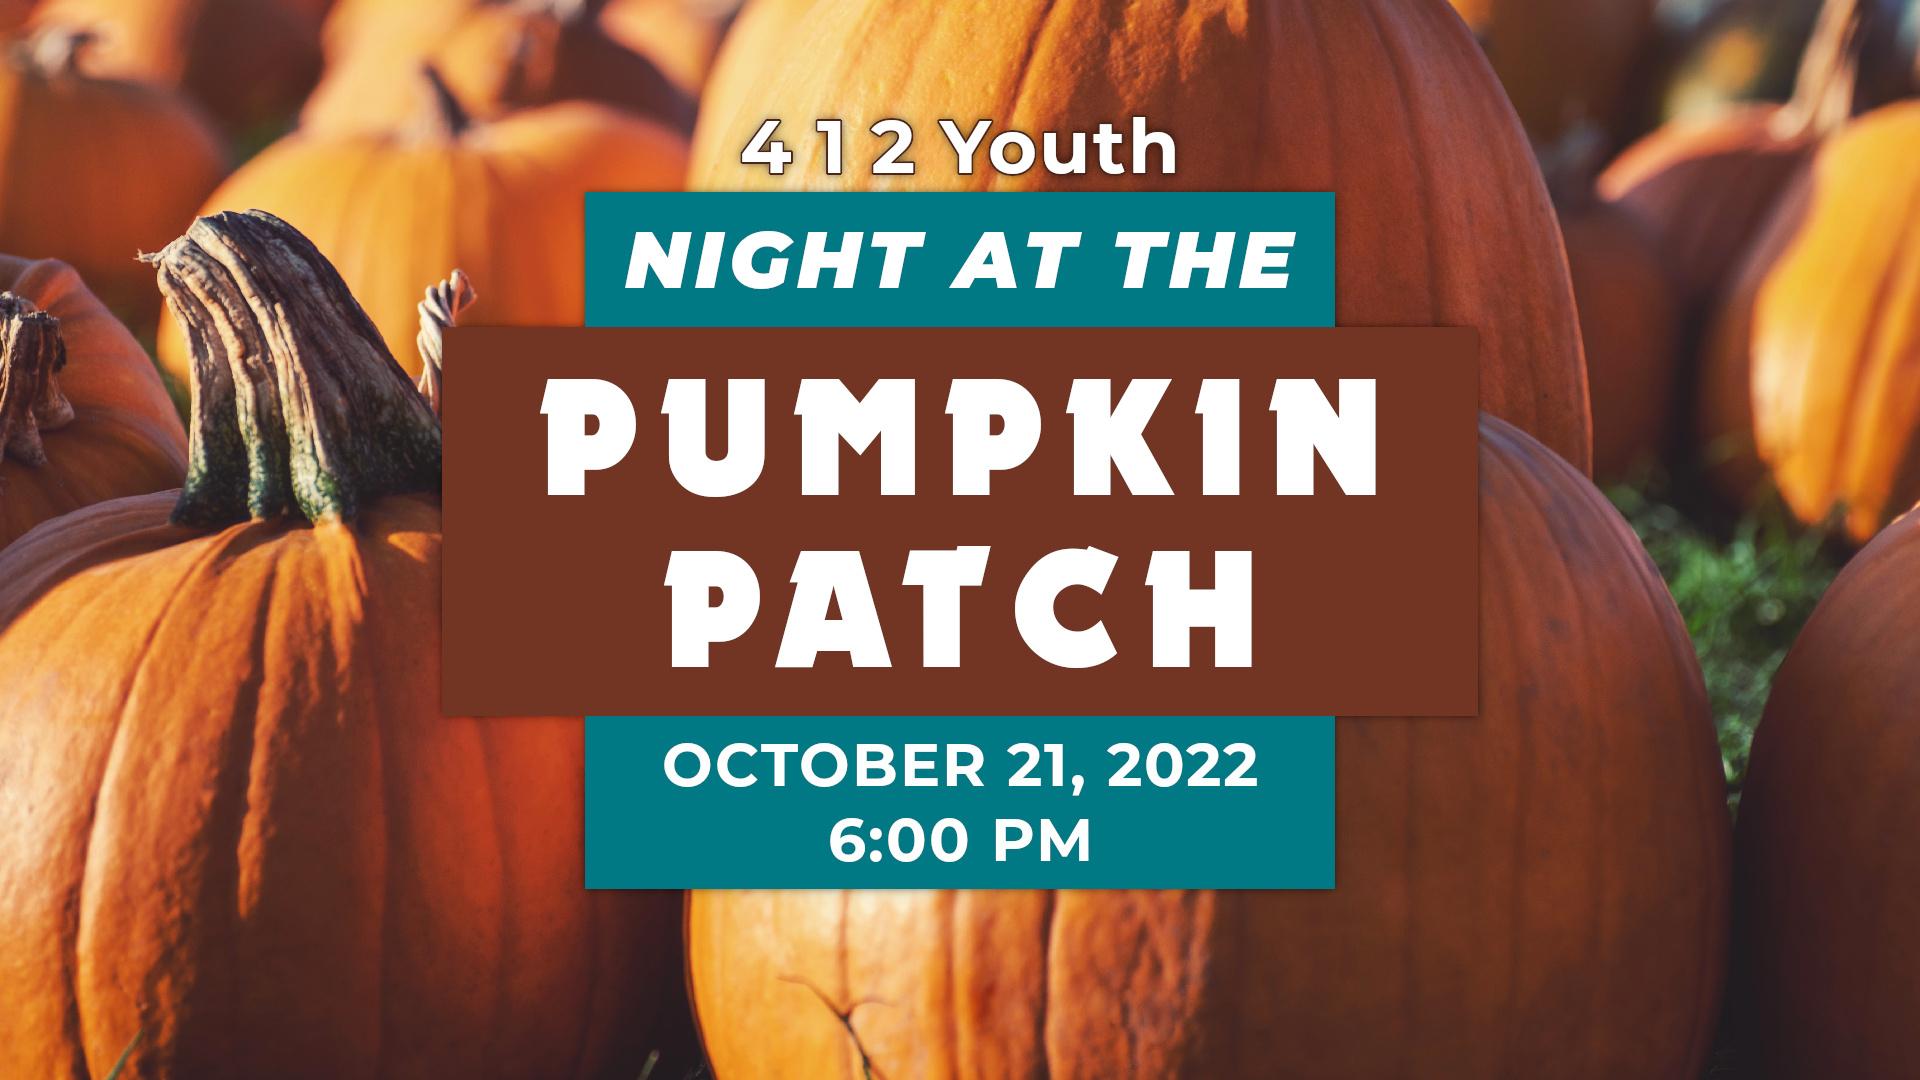 412 Youth Night at the Pumpkin Patch